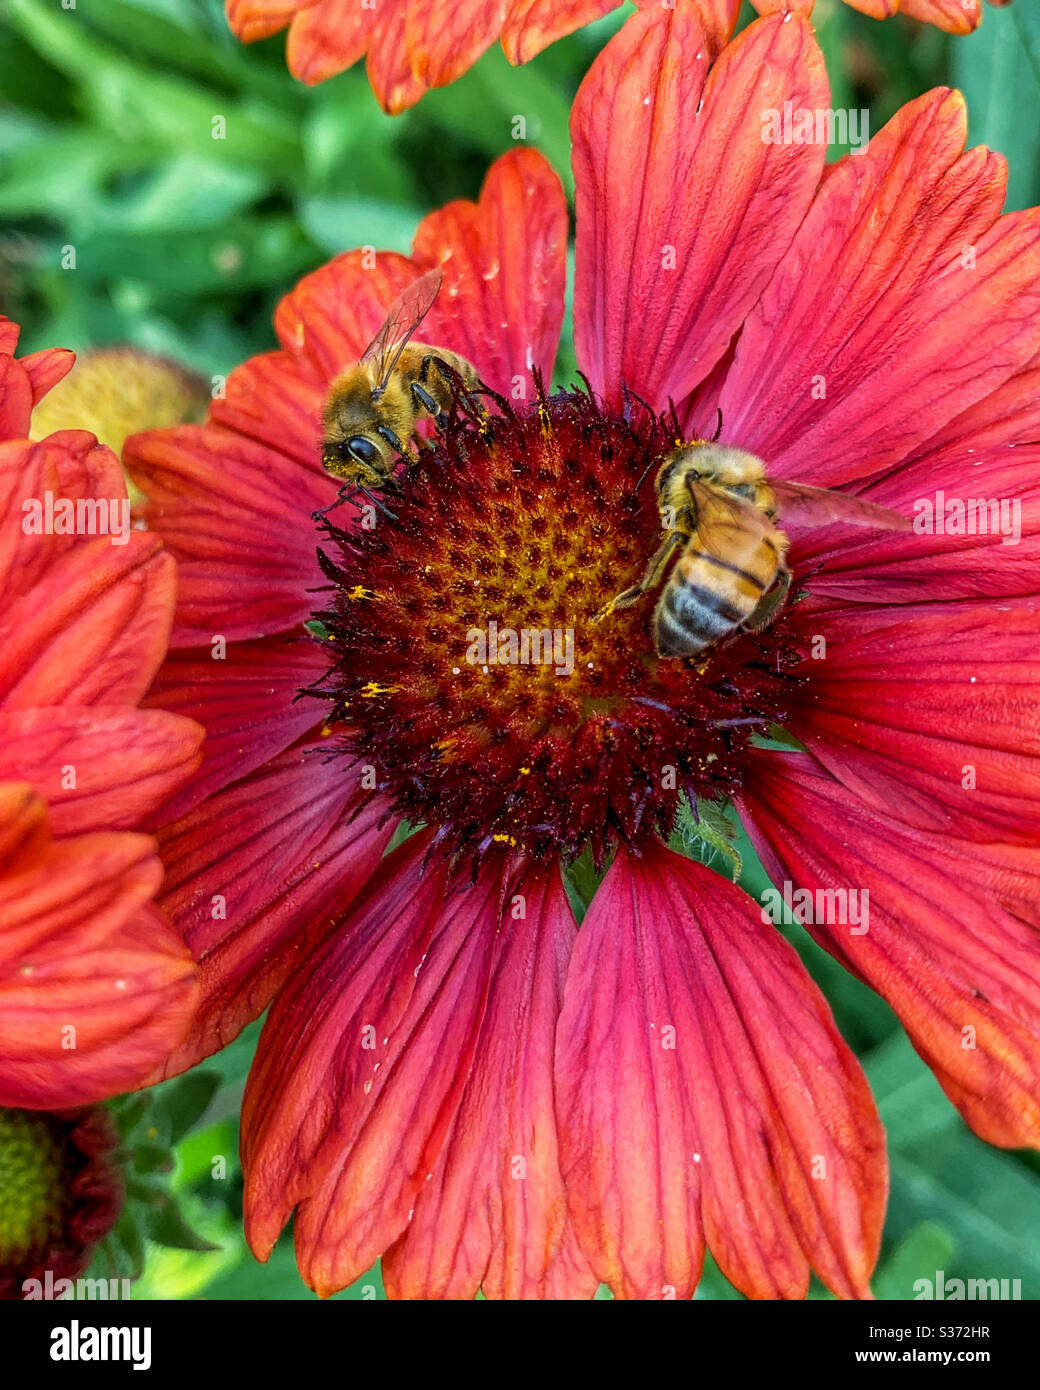 Two busy Bees on red flowers Stock Photo